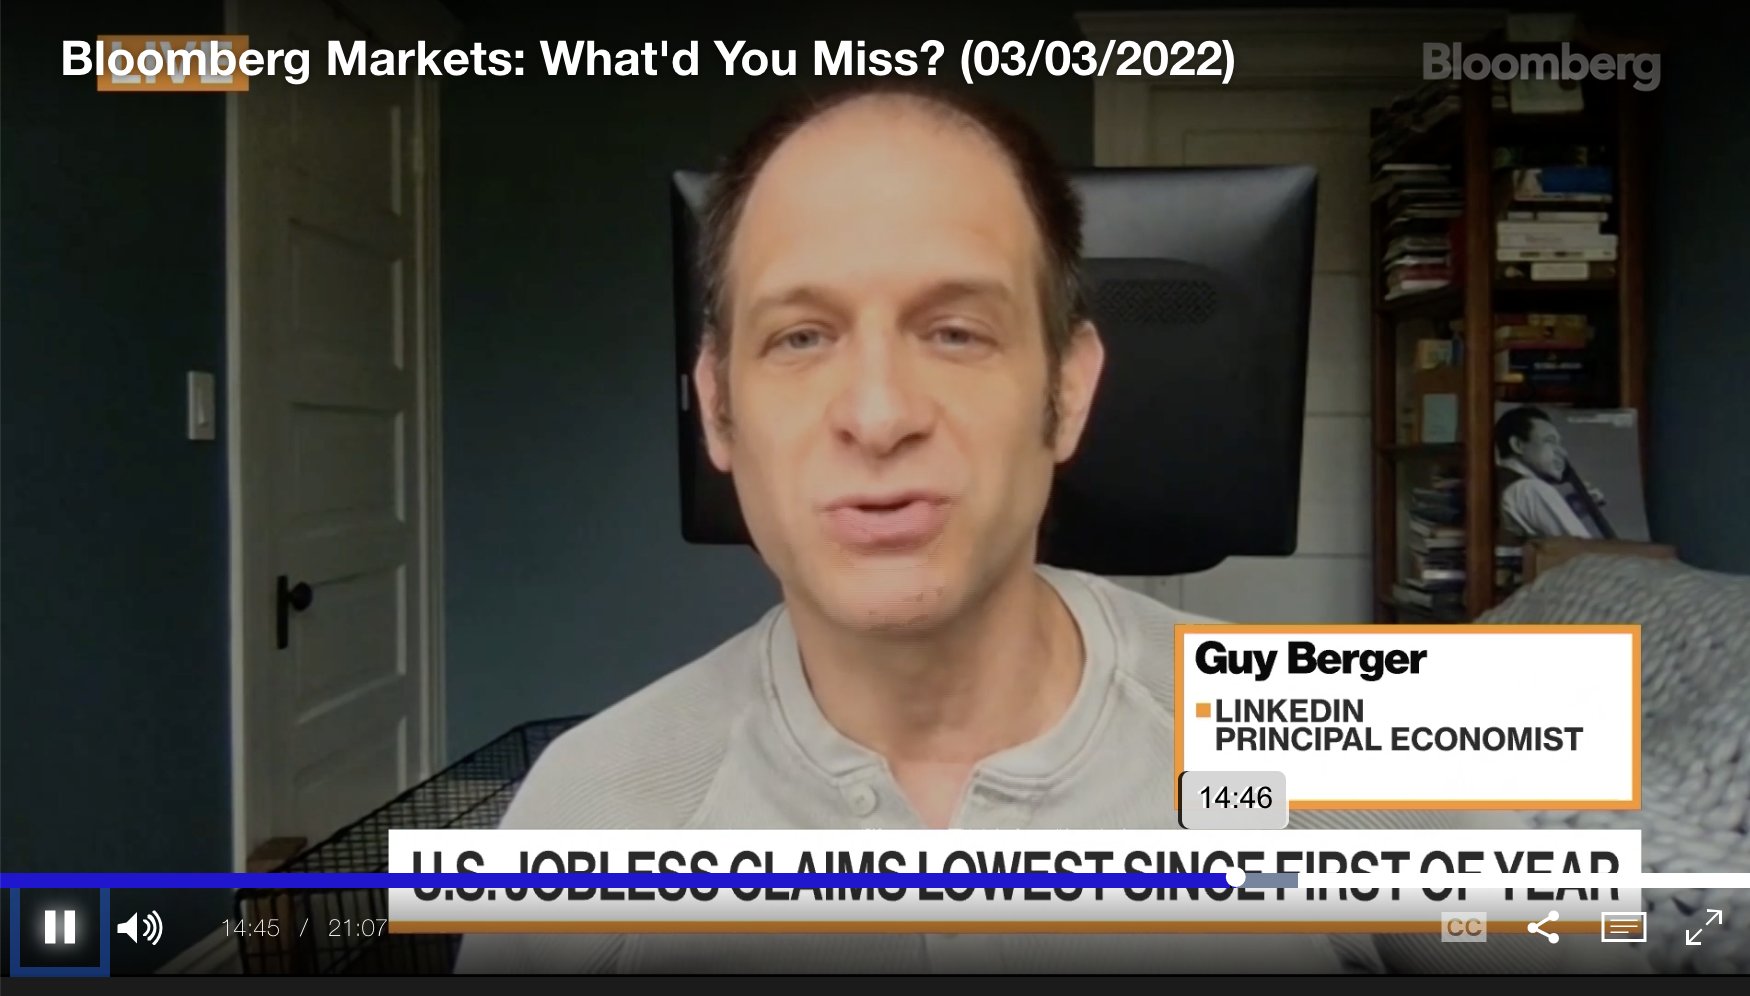 What'd You Miss? - Bloomberg